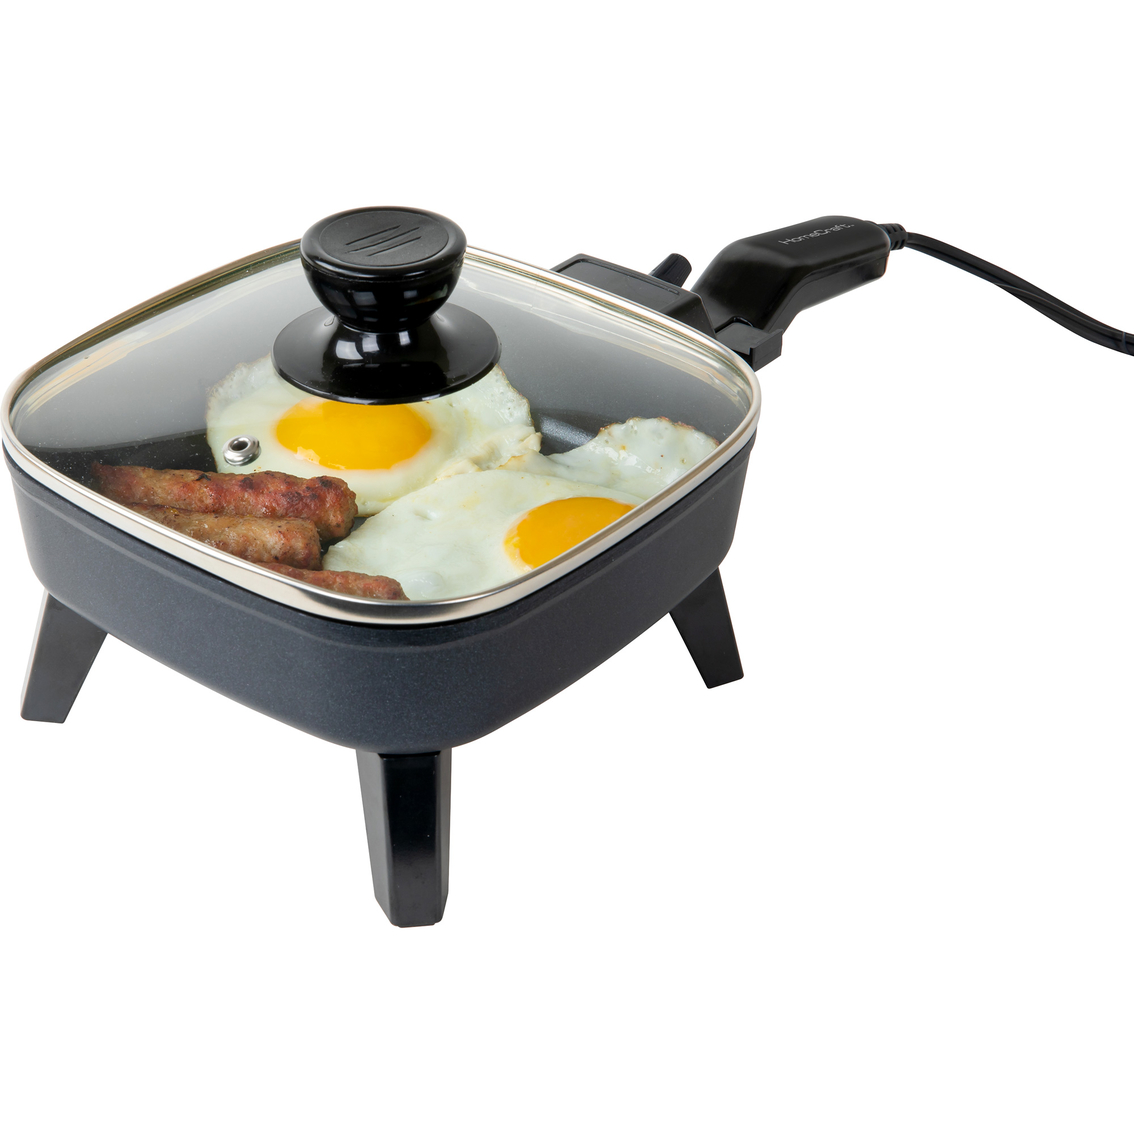 HomeCraft 6 in. Electric Non-Stick Skillet